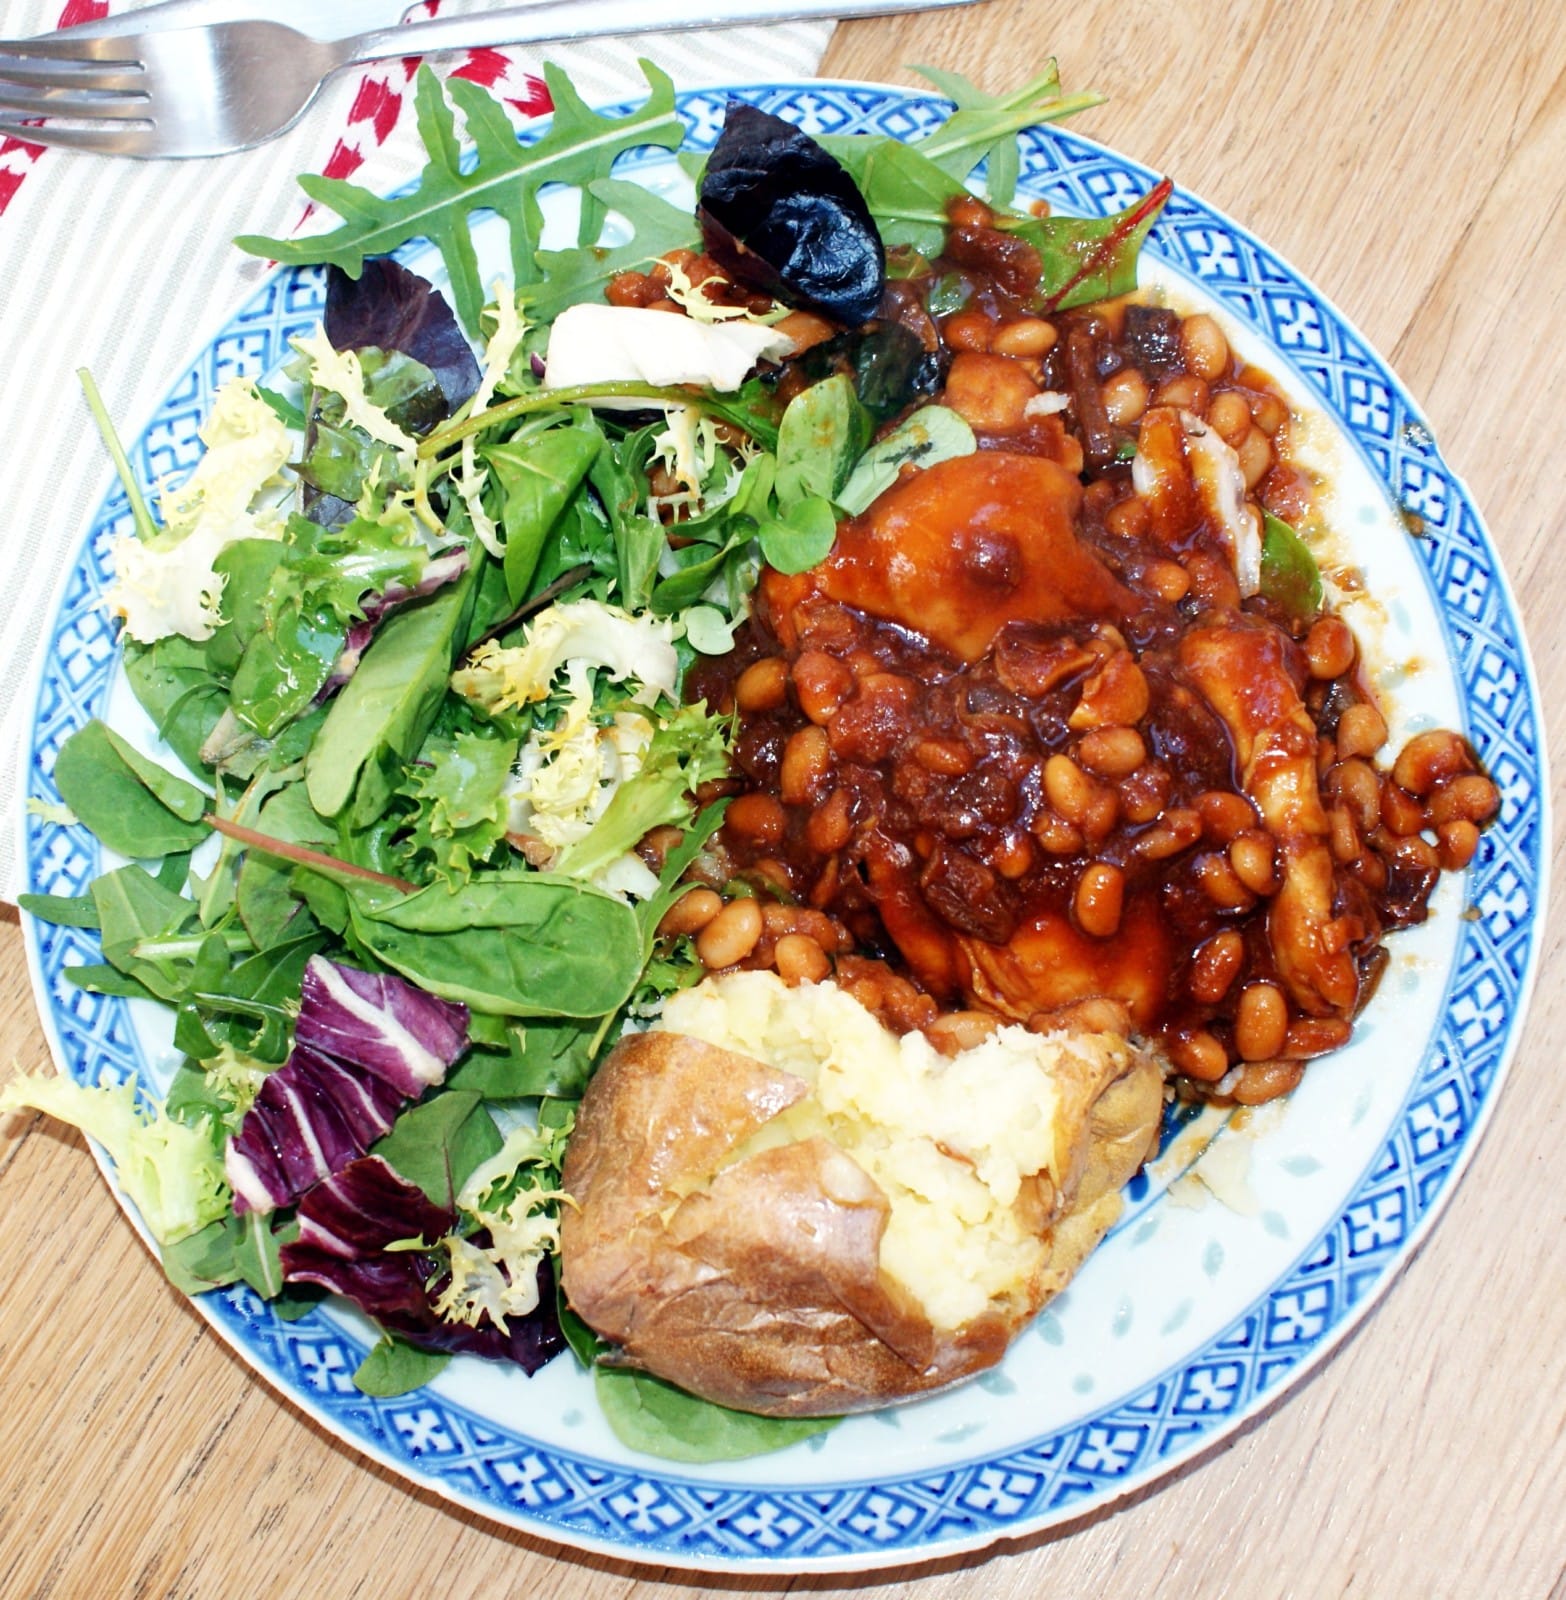 Chicken thighs in soy and honey, with a baked potato and salad